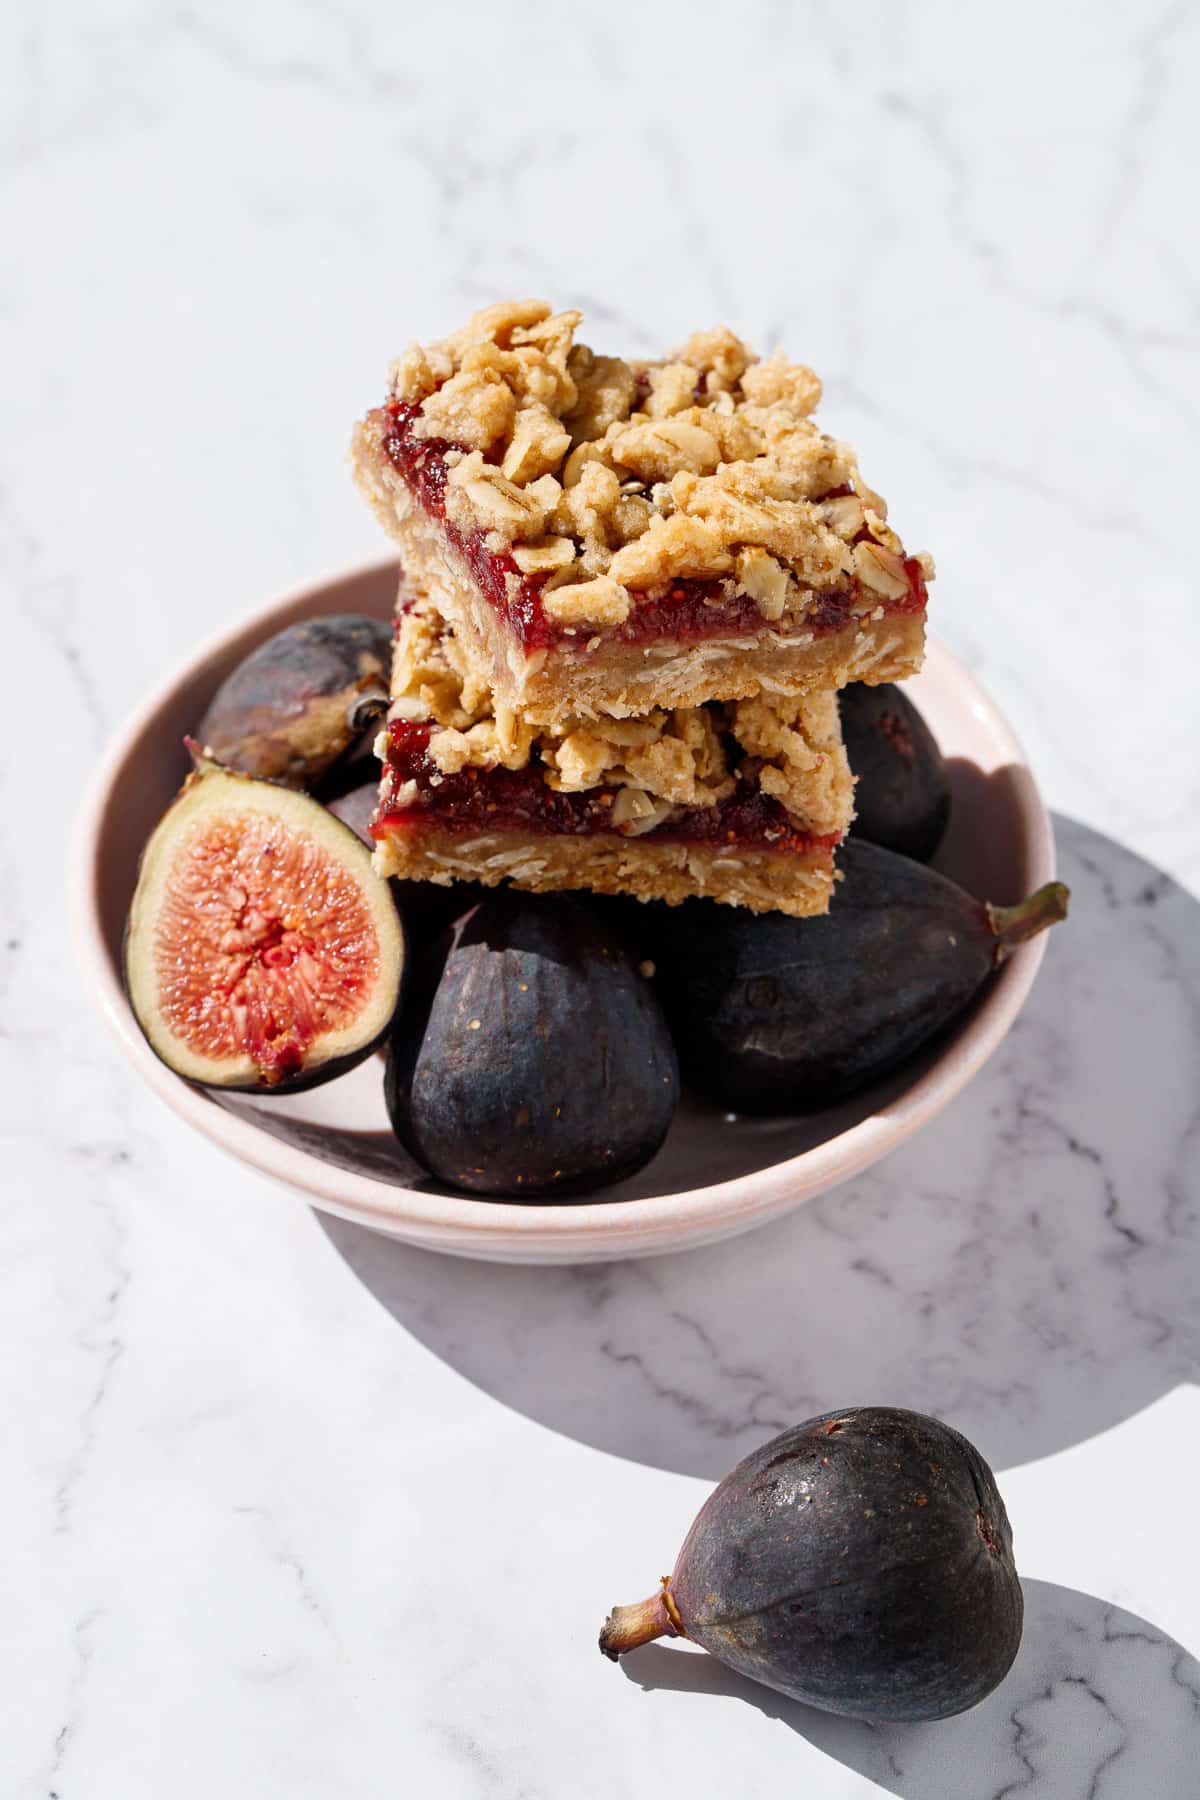 Two square Fig, Apple & Vanilla Crumb Bars sitting on top of a bowl of fresh mission figs, one cut in half to show the vibrant inside.